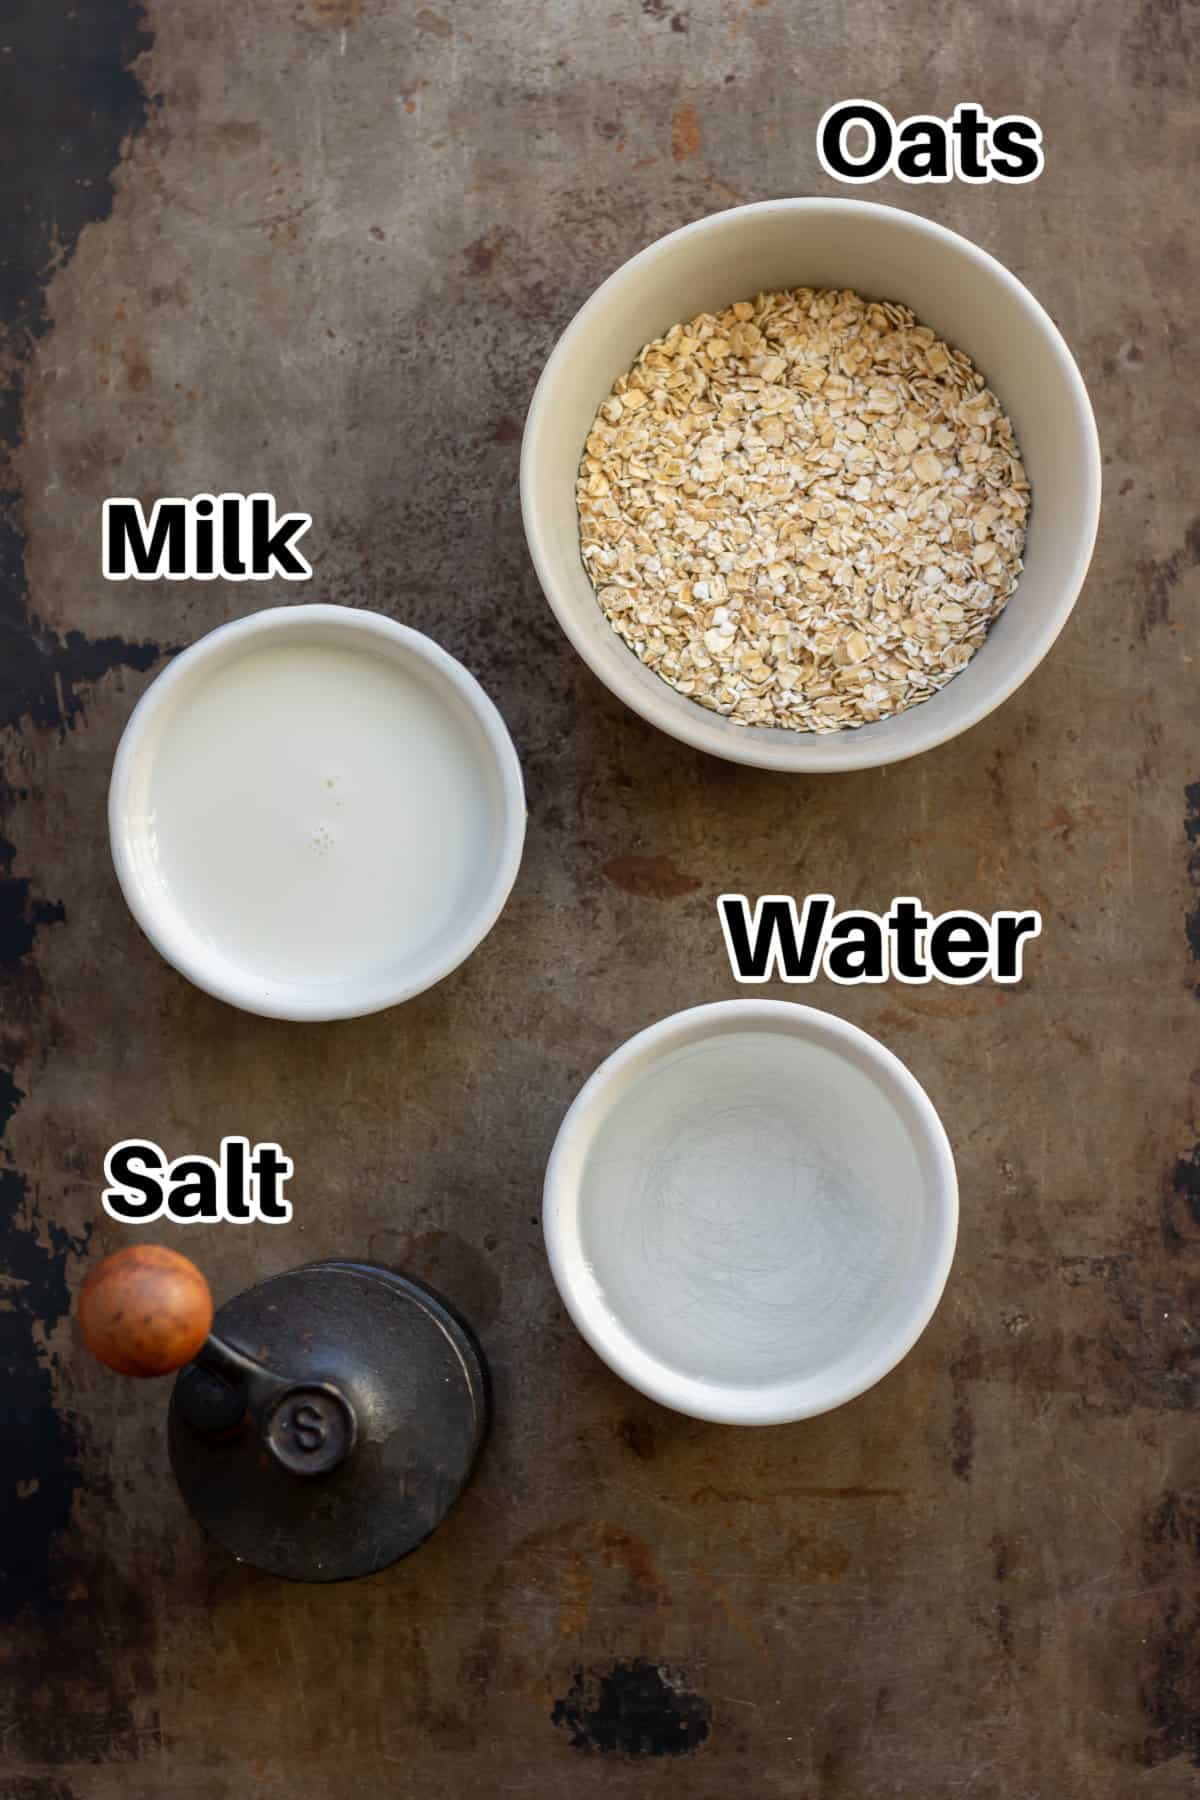 Metal table with bowls of oats, milk, water and a salt mill.